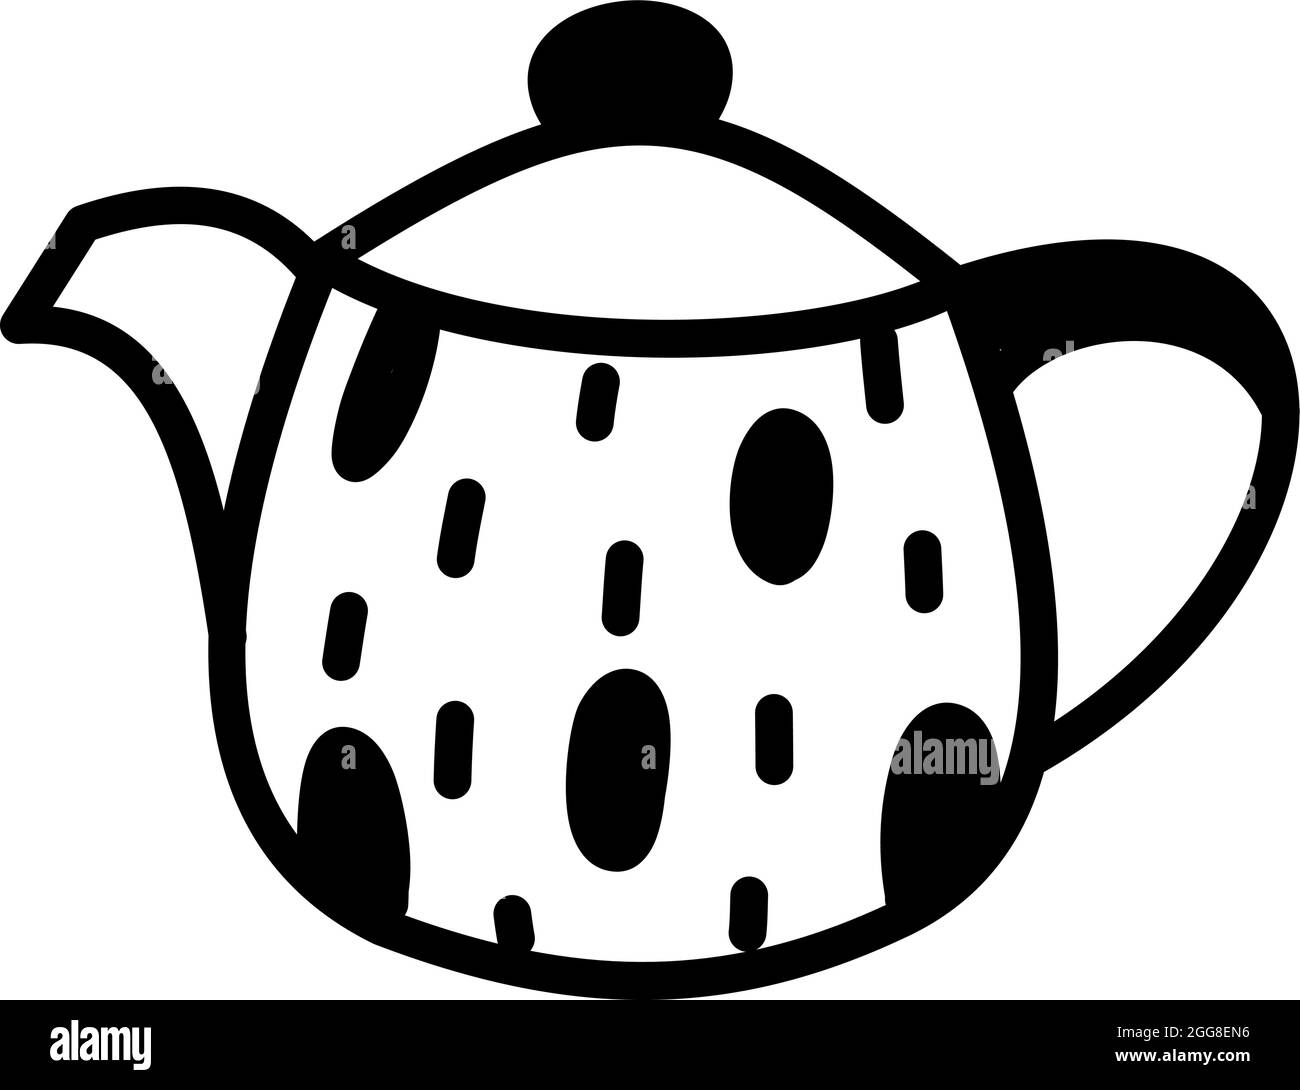 Round teapot with black dots, illustration, vector on a white background. Stock Vector